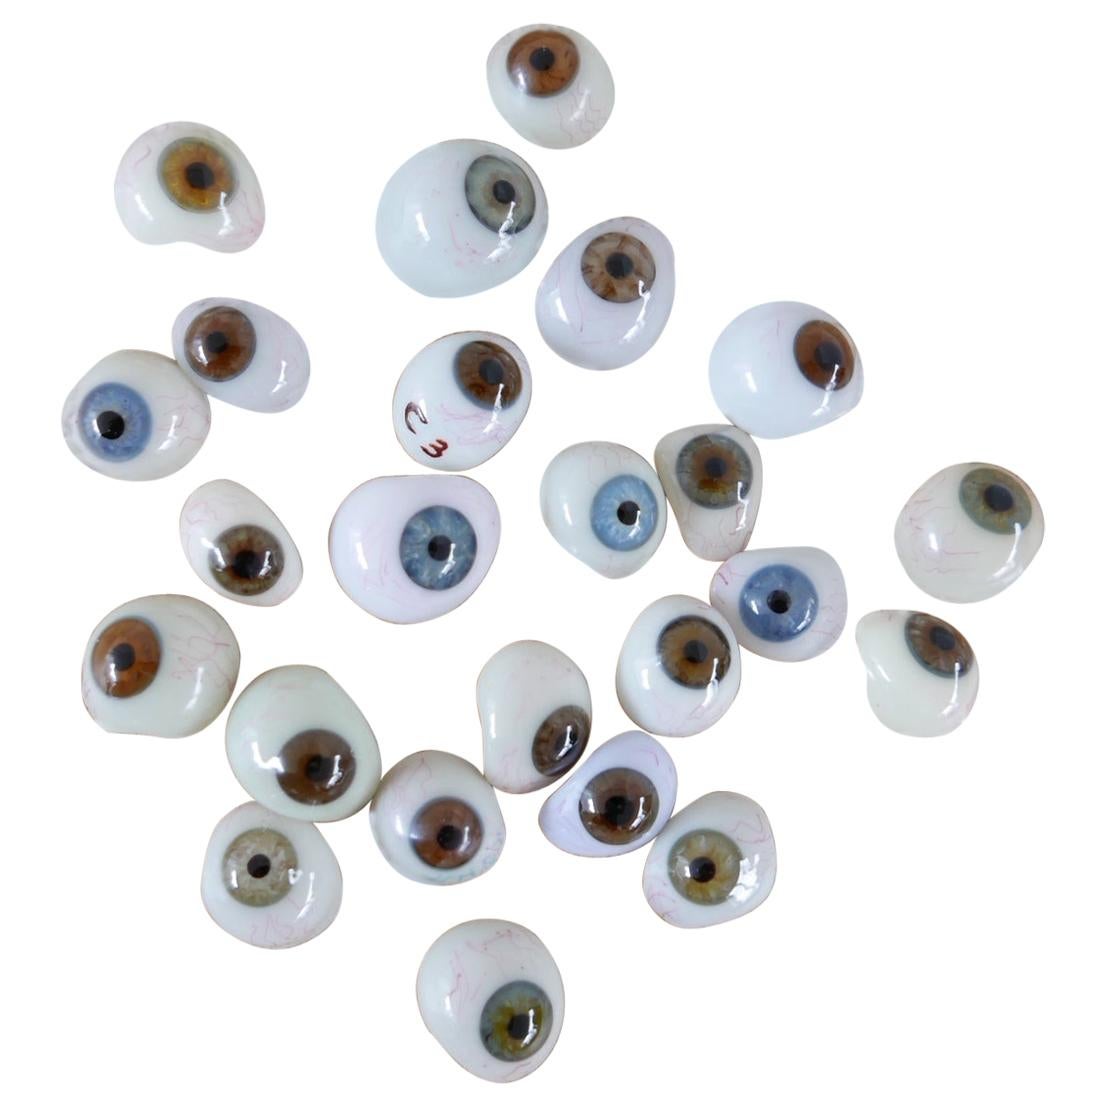 Porcelain Glass Collection of Eye Prostheses For Sale